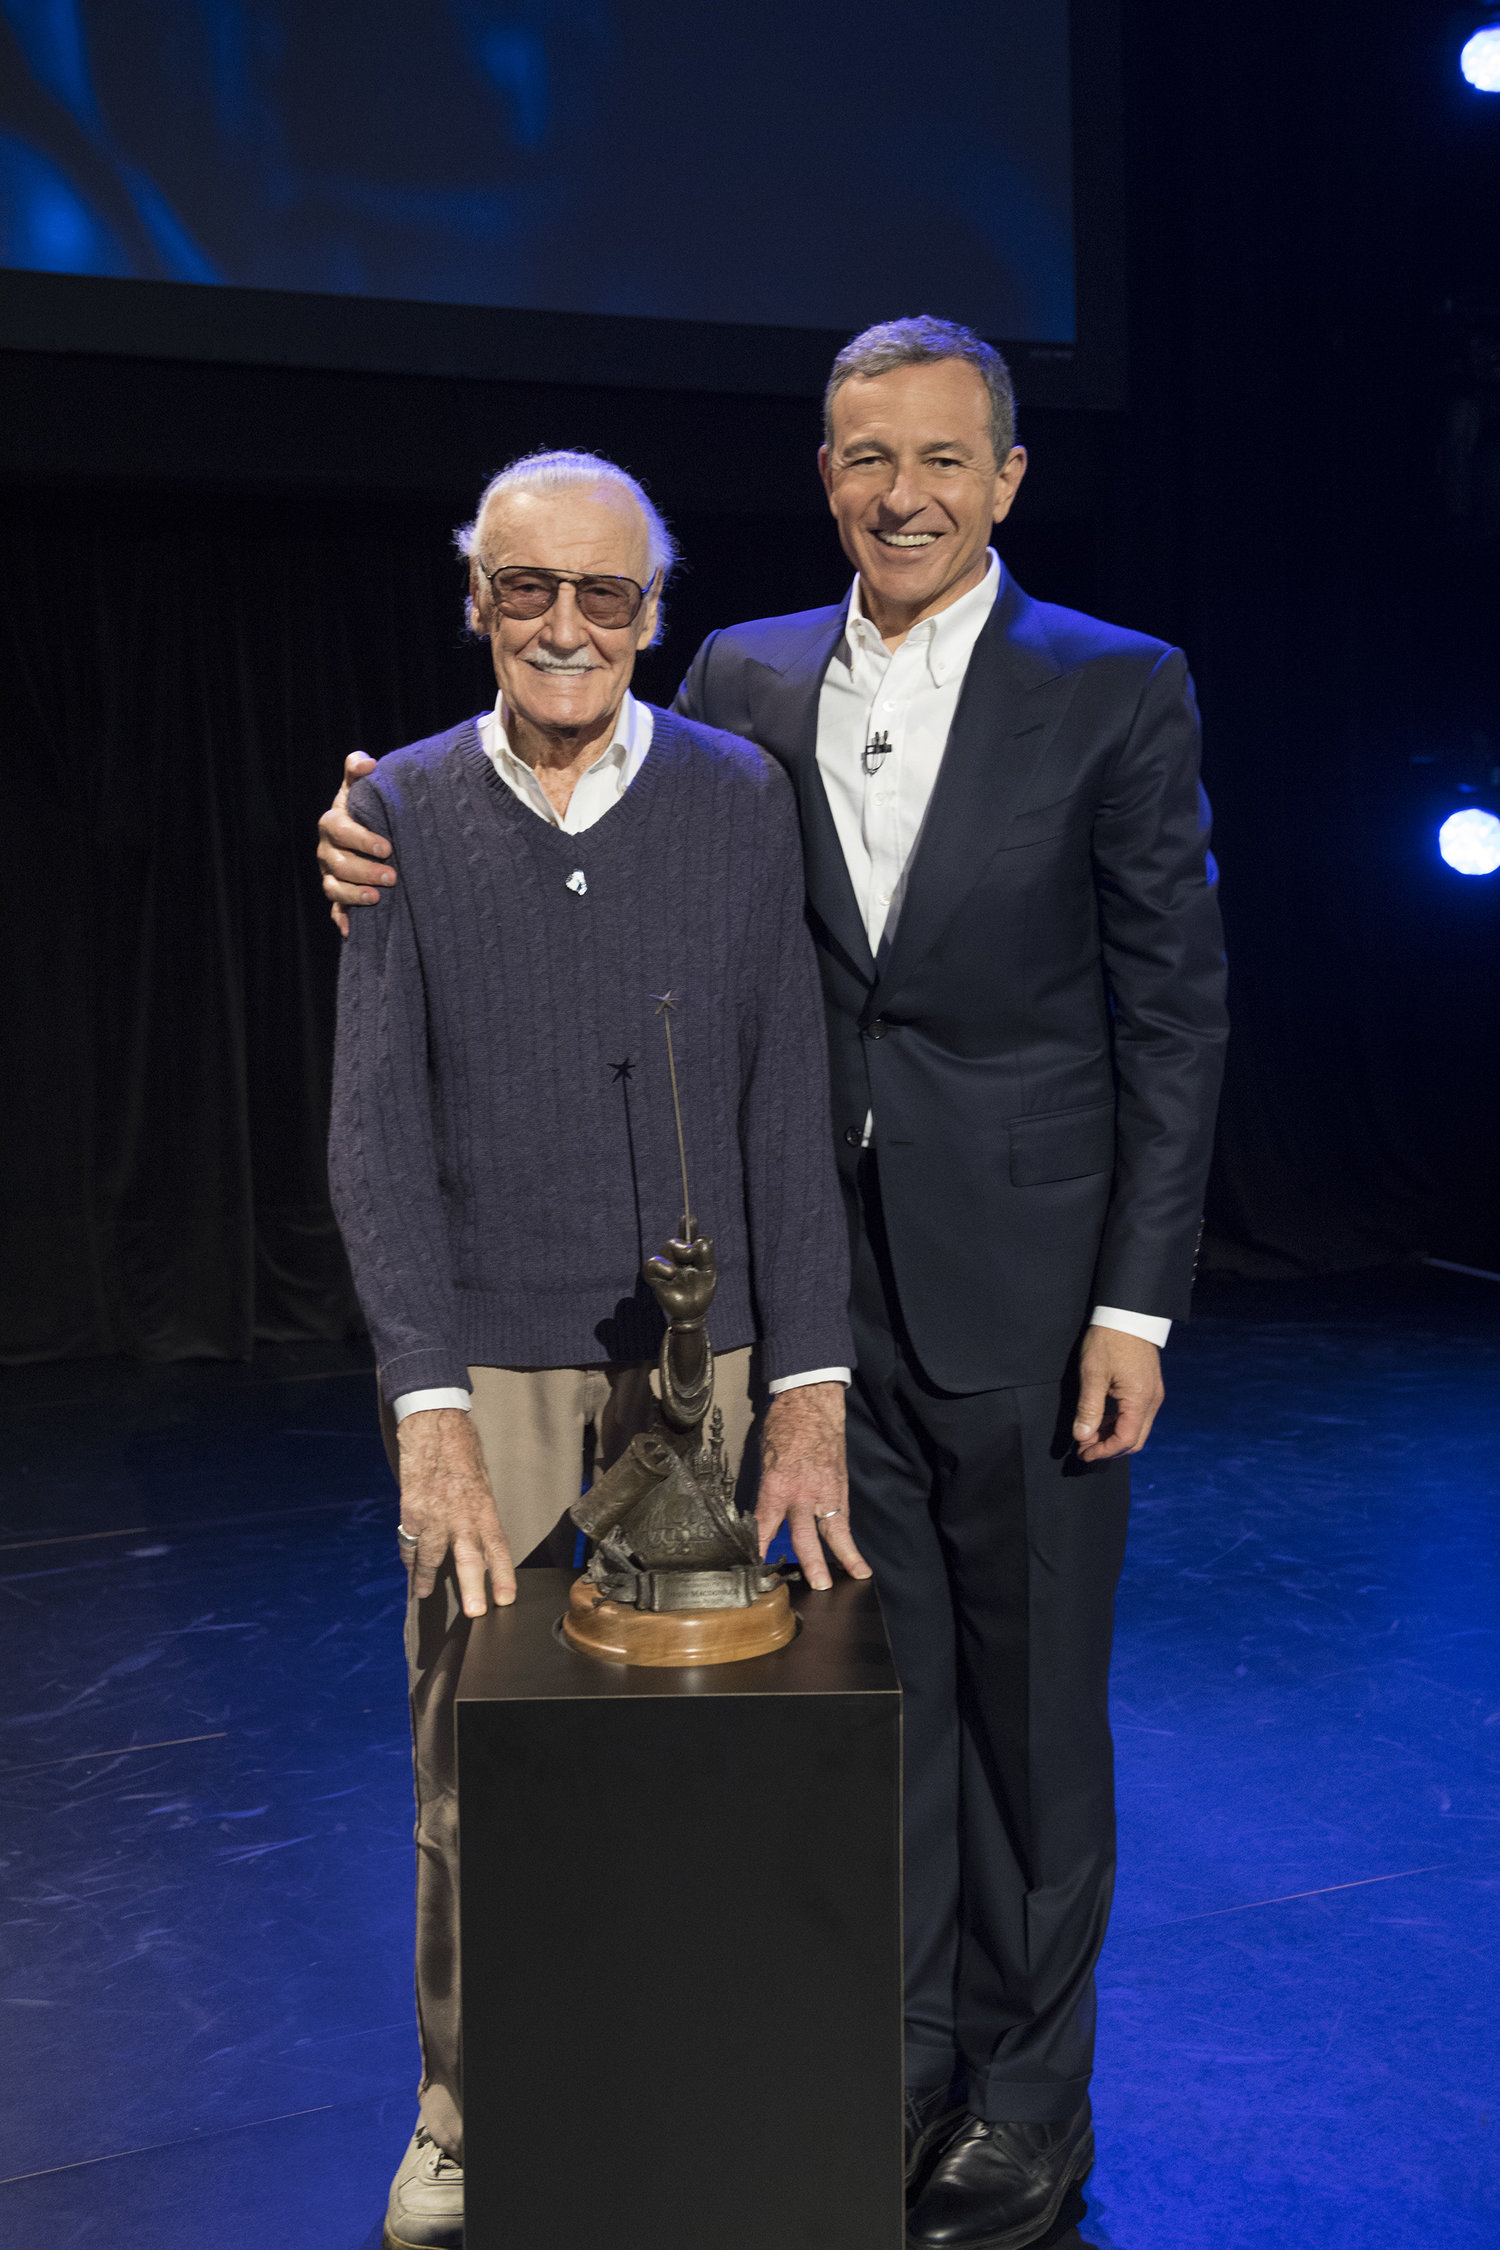 STAN LEE, ROBERT A. IGER (CHAIRMAN AND CHIEF EXECUTIVE